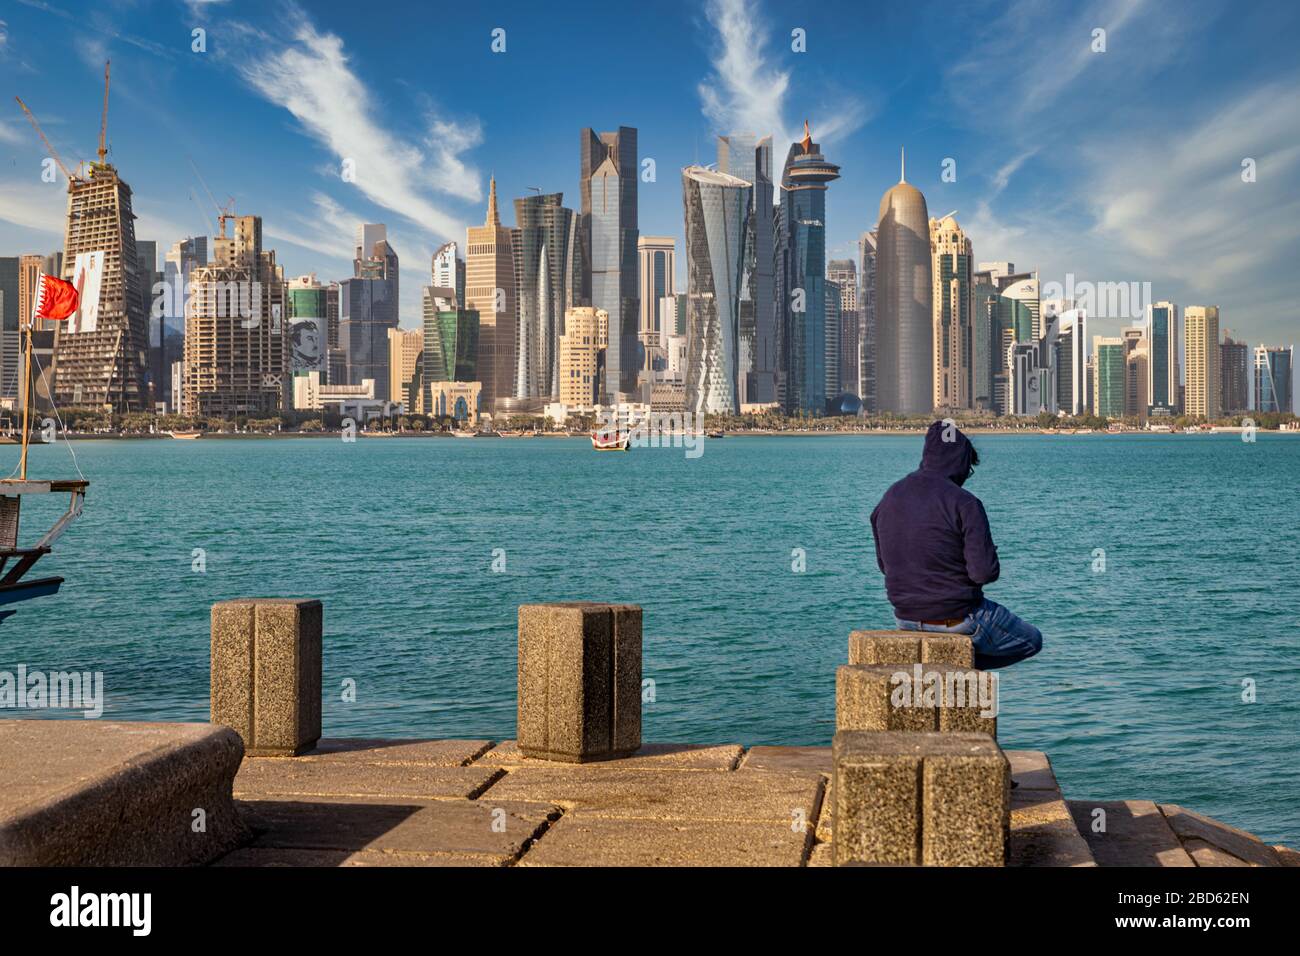 Doha Qatar skyline daylight view with clouds in the sky showing skyscrapers in background and a man sitting on Doha Cor niche in foreground with Qatar Stock Photo